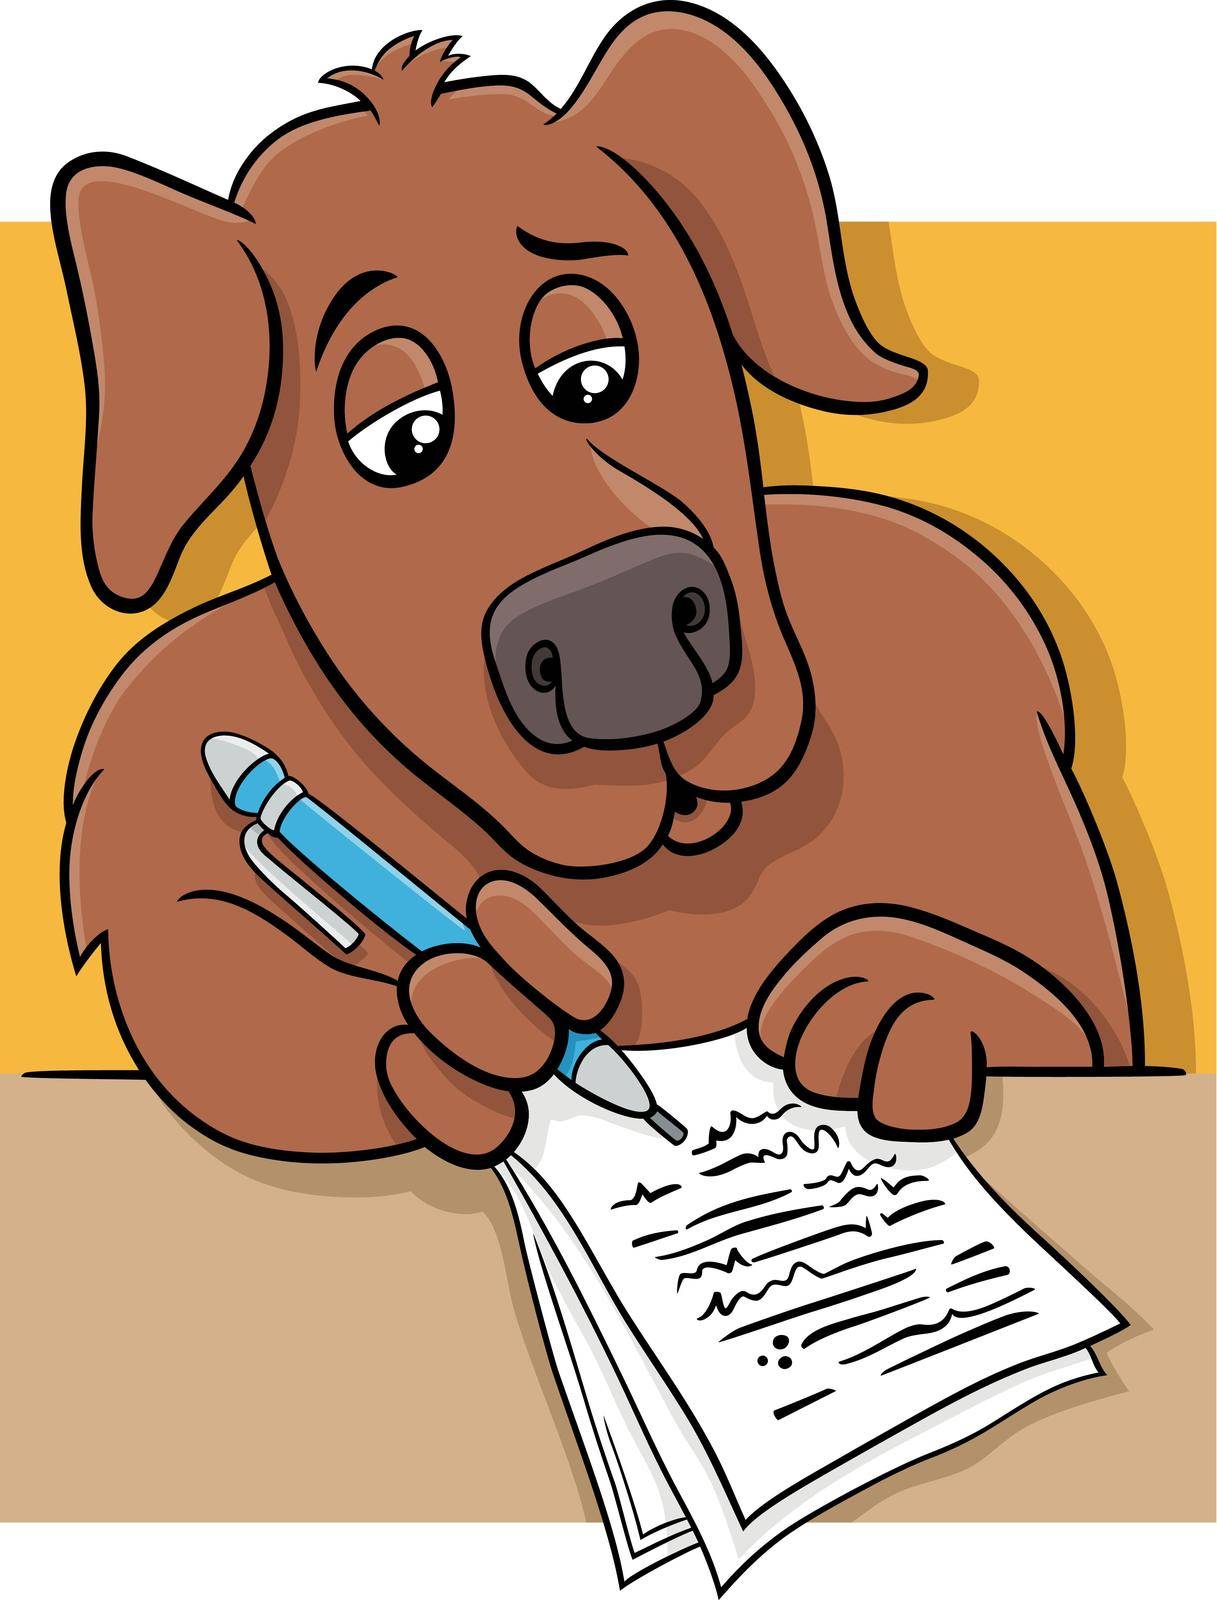 Cartoon illustration of the writer or poet dog writting on paper